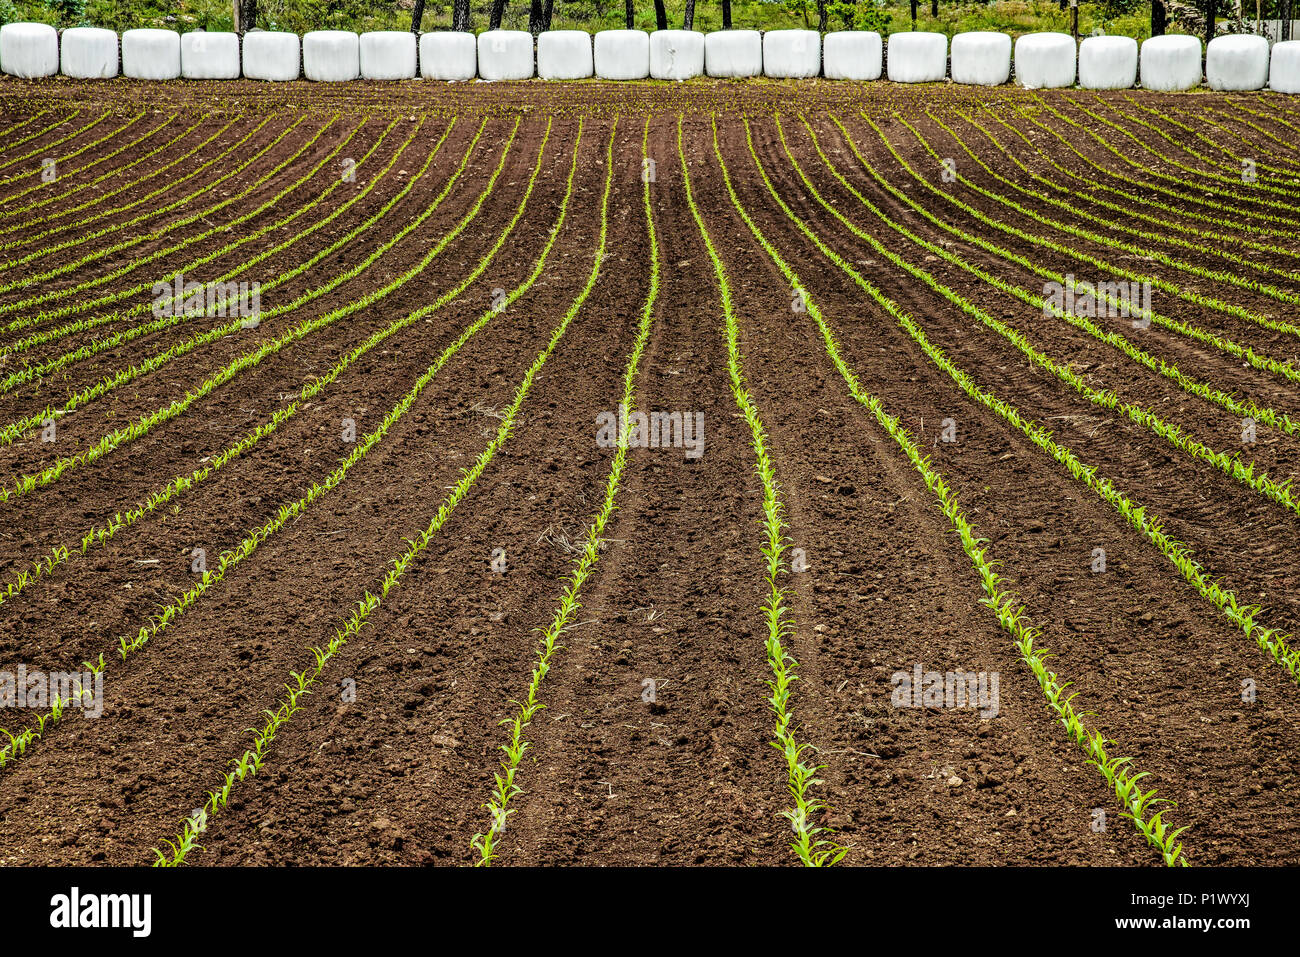 Crops growing In straight lines. Portugal. Stock Photo